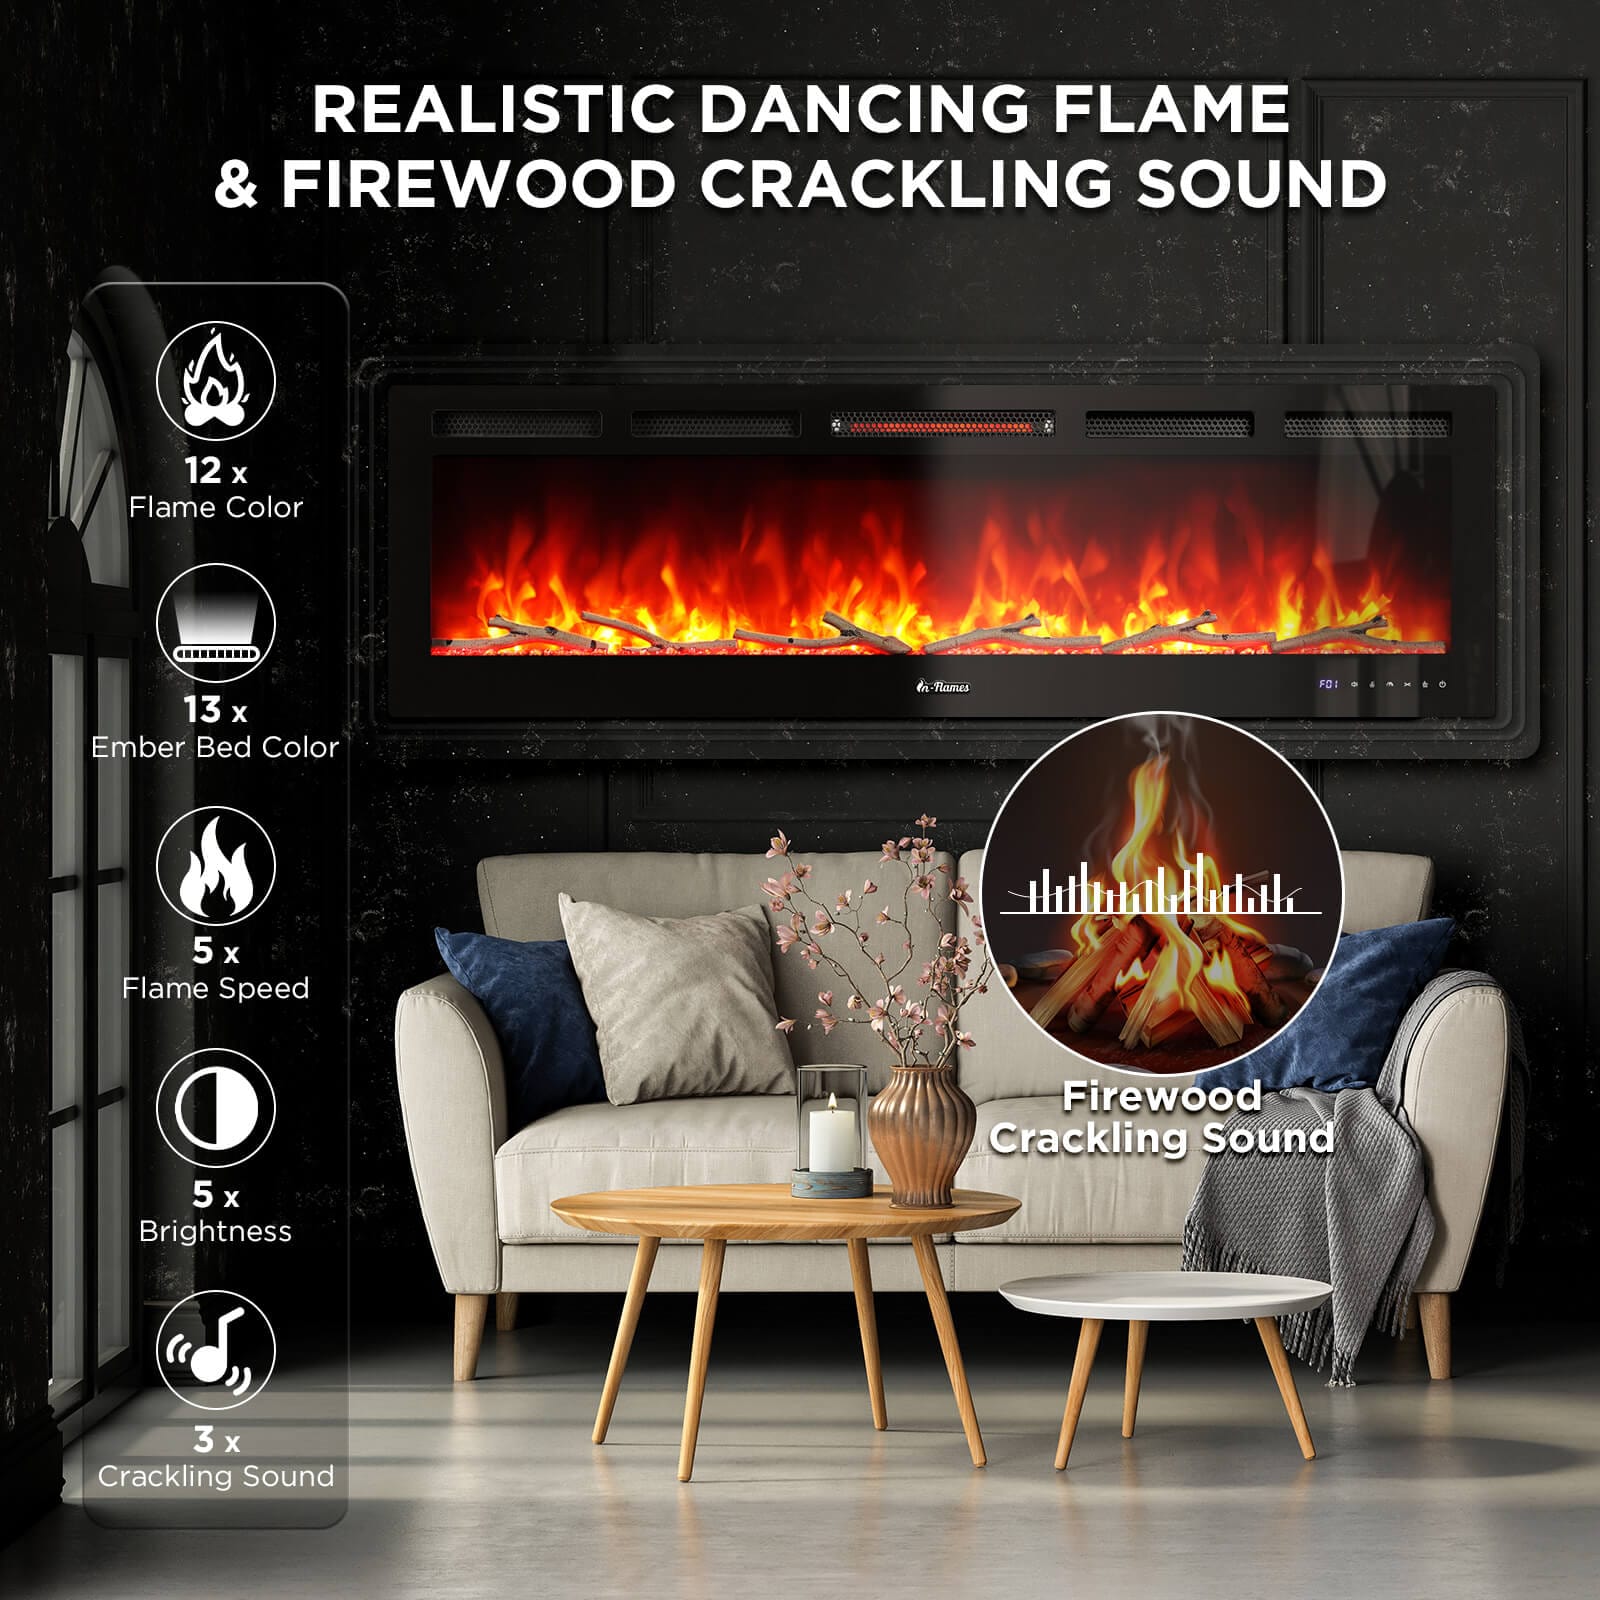 TURBRO In Flames INF60W-3D WiFi Smart Wall Mounted Electric Fireplace - Tempered Glass Wall Mounted Electric Fireplace